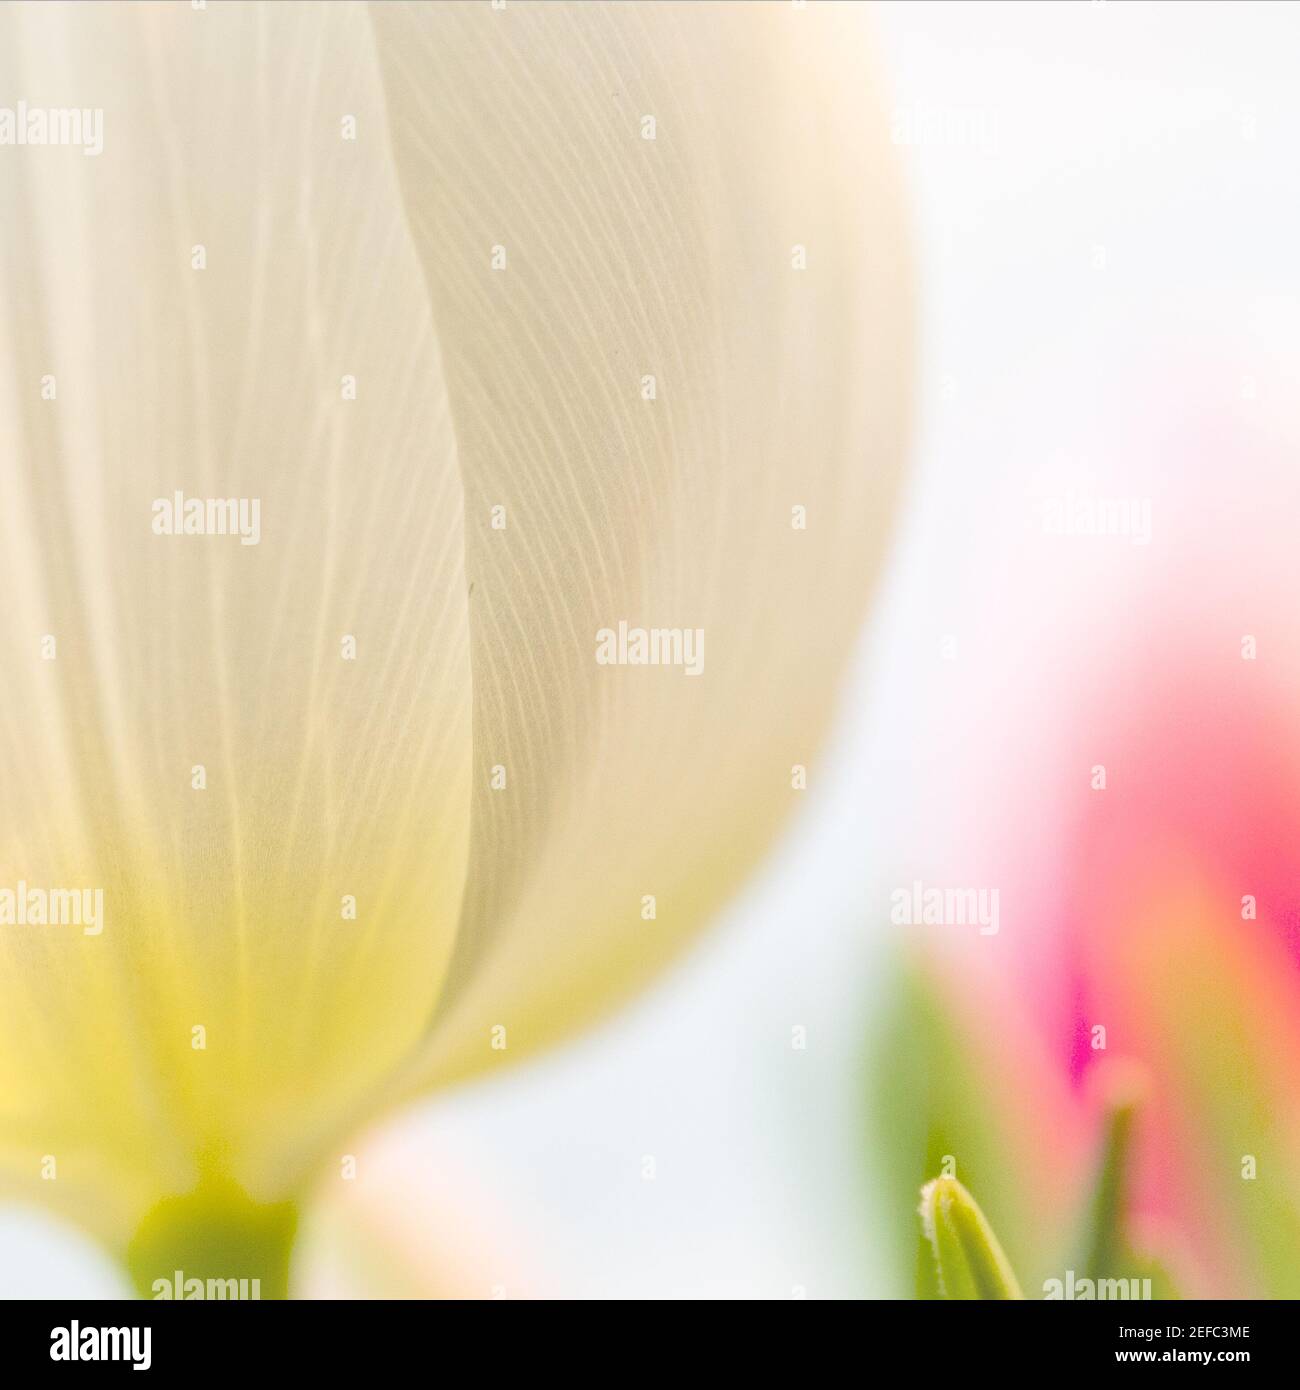 Abstract image of the base of a tulip with unfocused background. Stock Photo